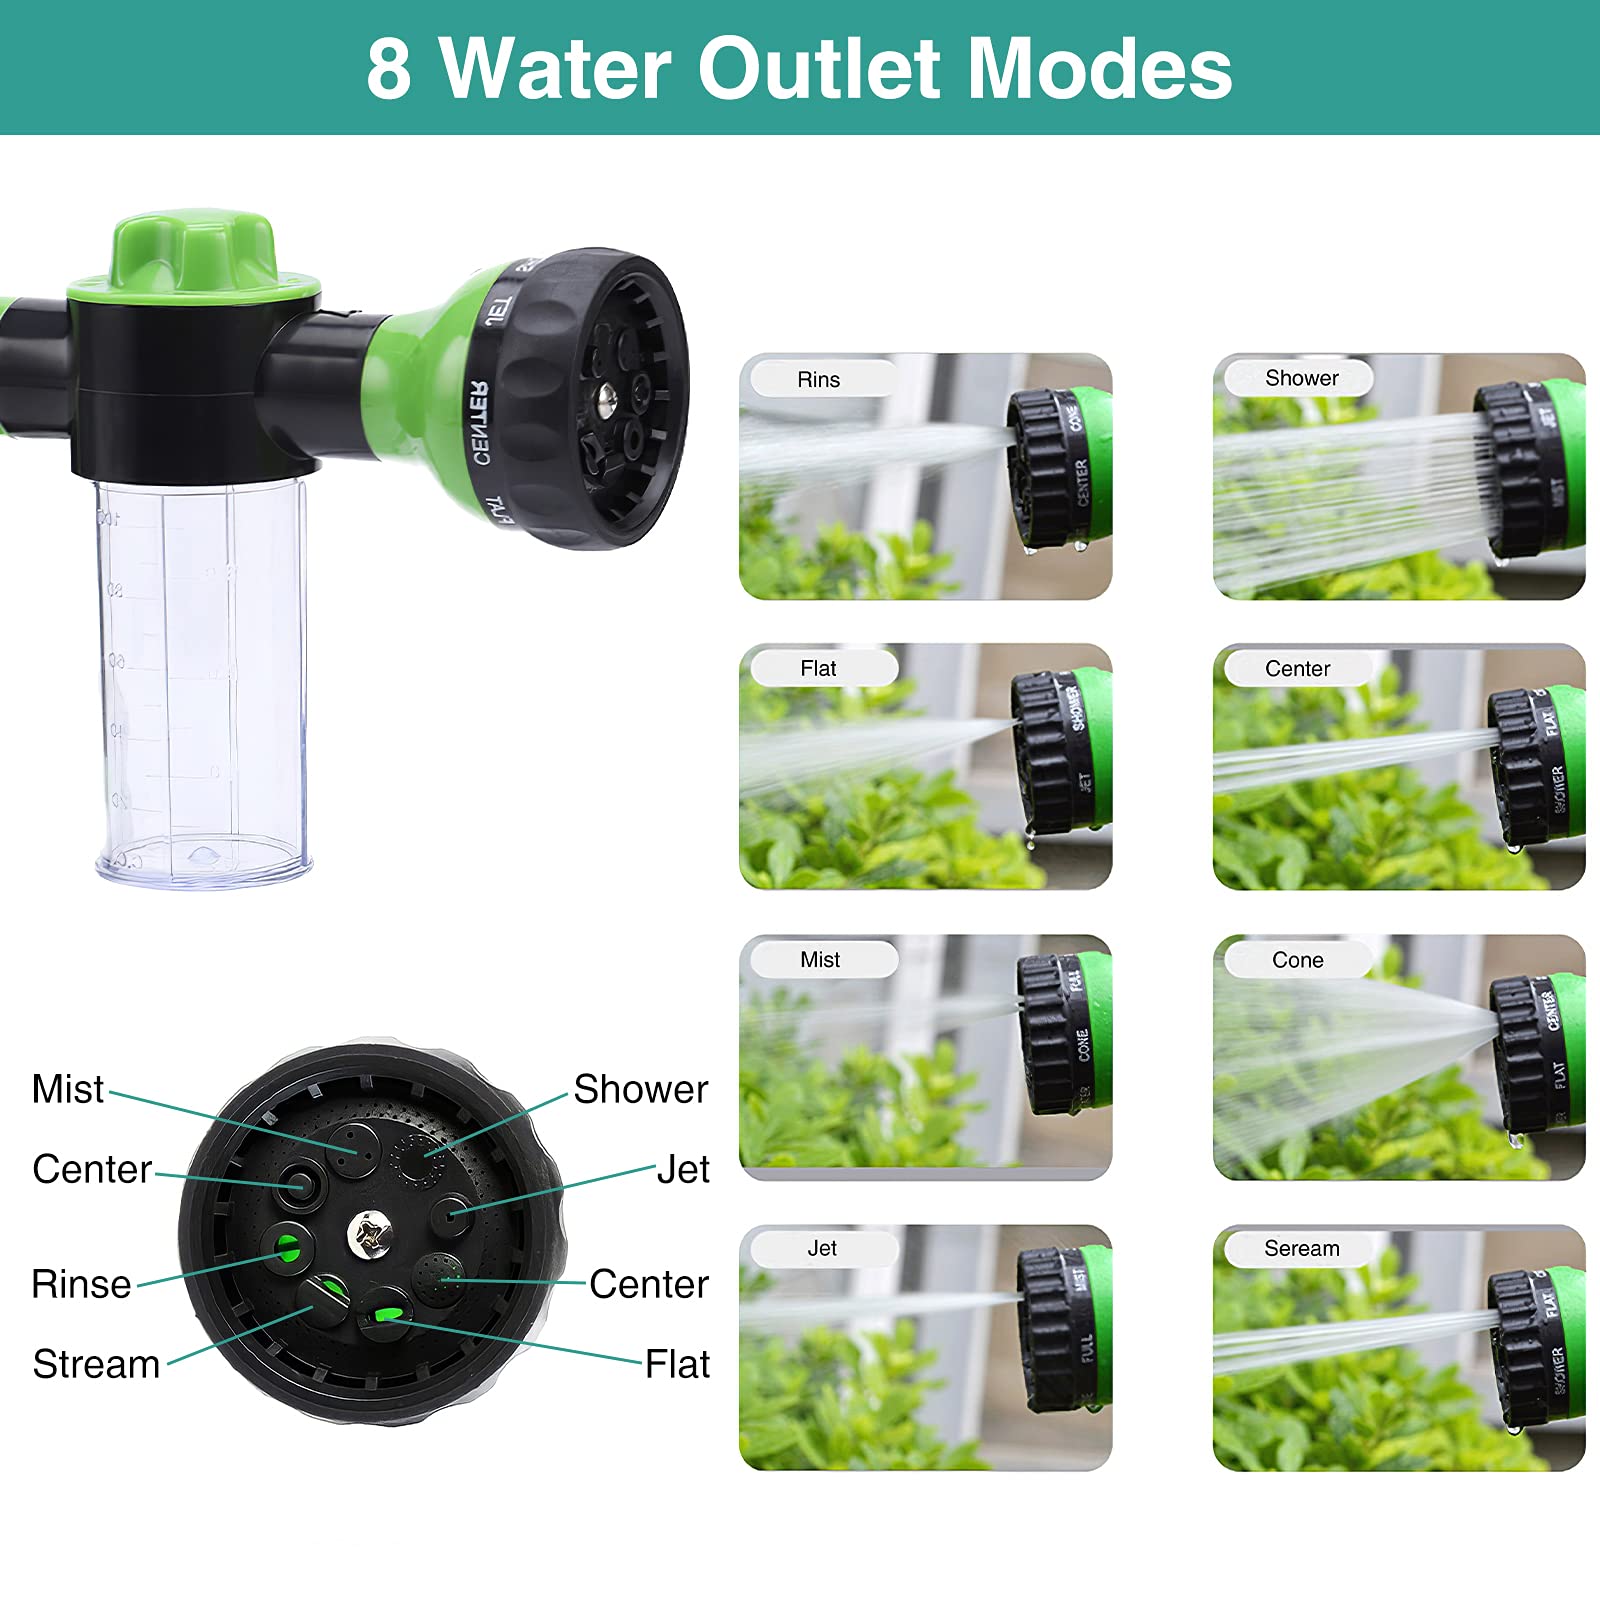 Garden Hose Nozzle, High Pressure Spray Gun Nozzle, 8 Spray Patterns for Watering Plants, Lawn, Patio, Cleaning, Showering Pet with 3.5oz/100cc Soap Dispenser Bottle